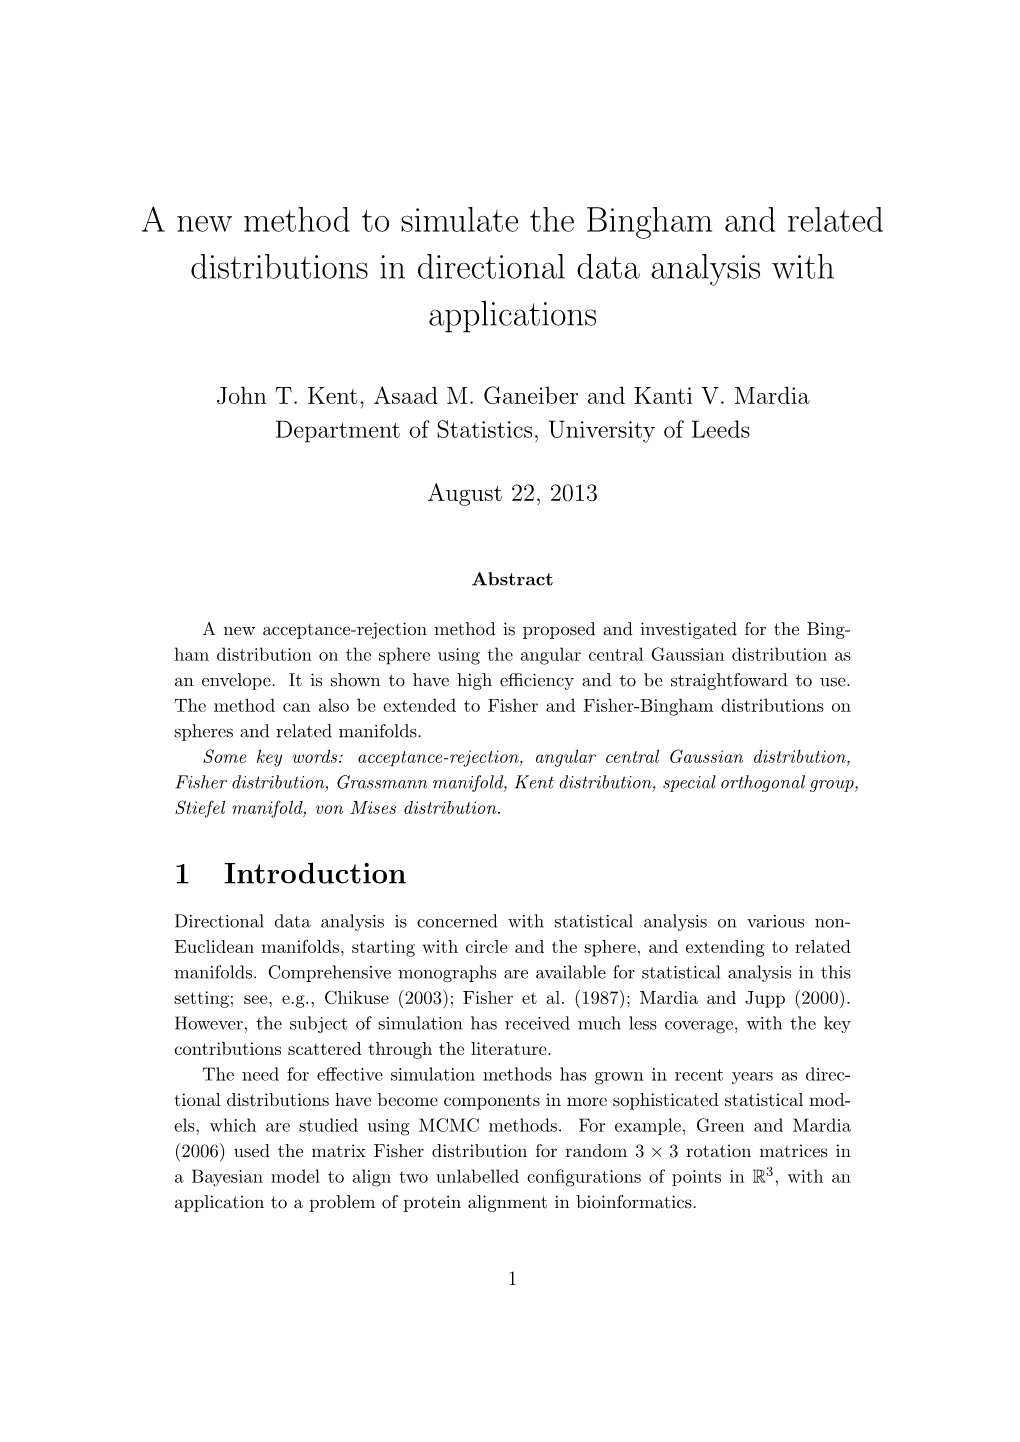 A New Method to Simulate the Bingham and Related Distributions in Directional Data Analysis with Applications